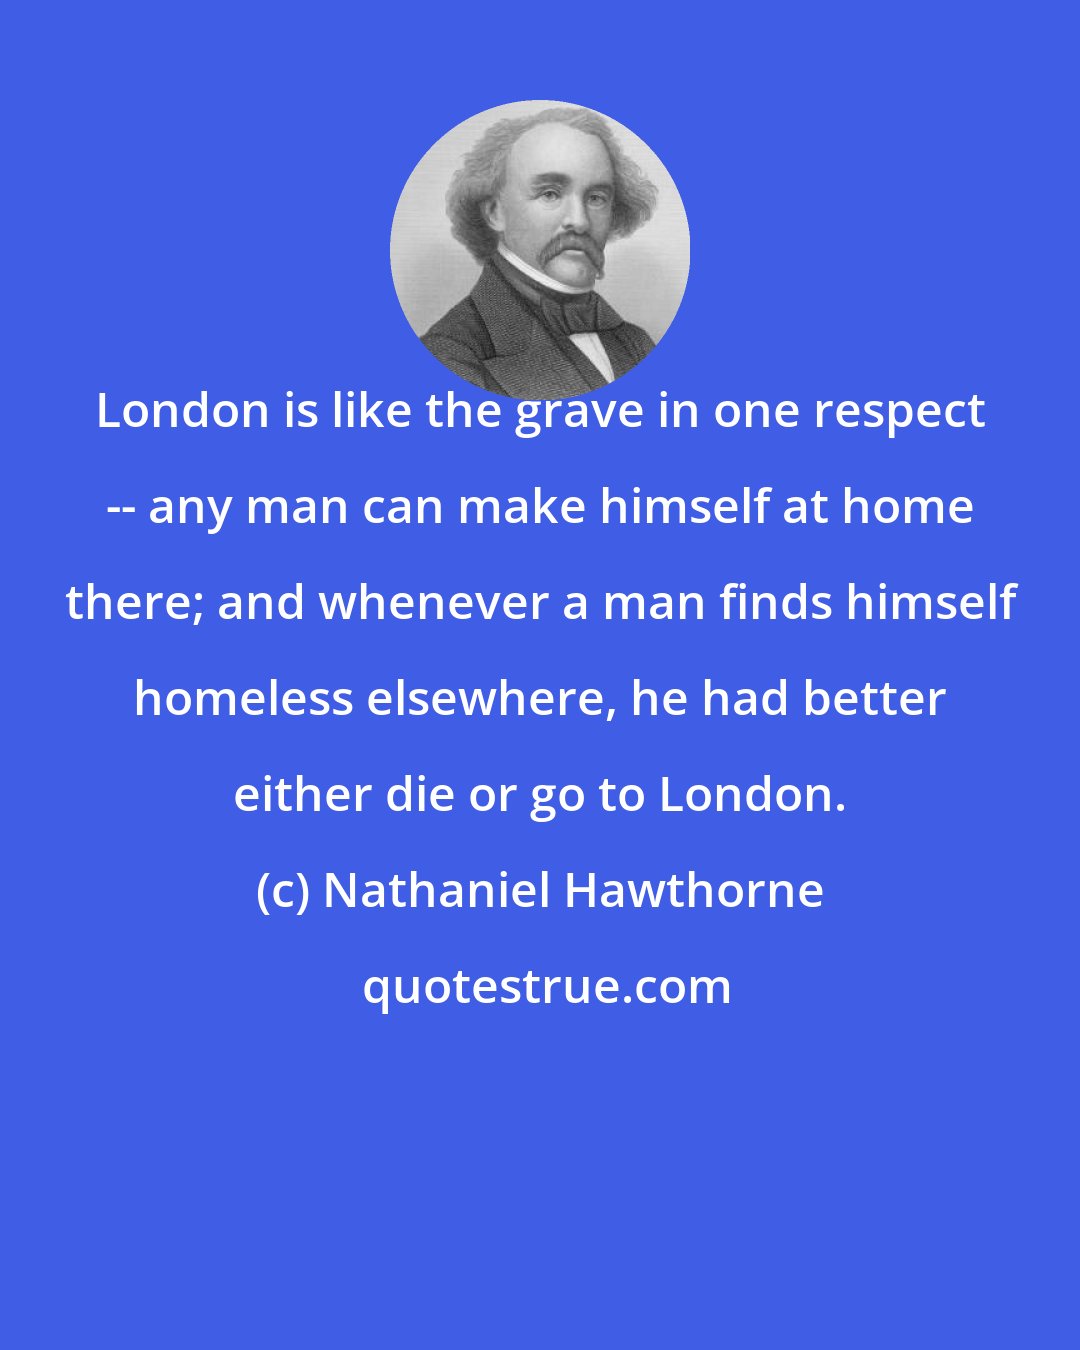 Nathaniel Hawthorne: London is like the grave in one respect -- any man can make himself at home there; and whenever a man finds himself homeless elsewhere, he had better either die or go to London.